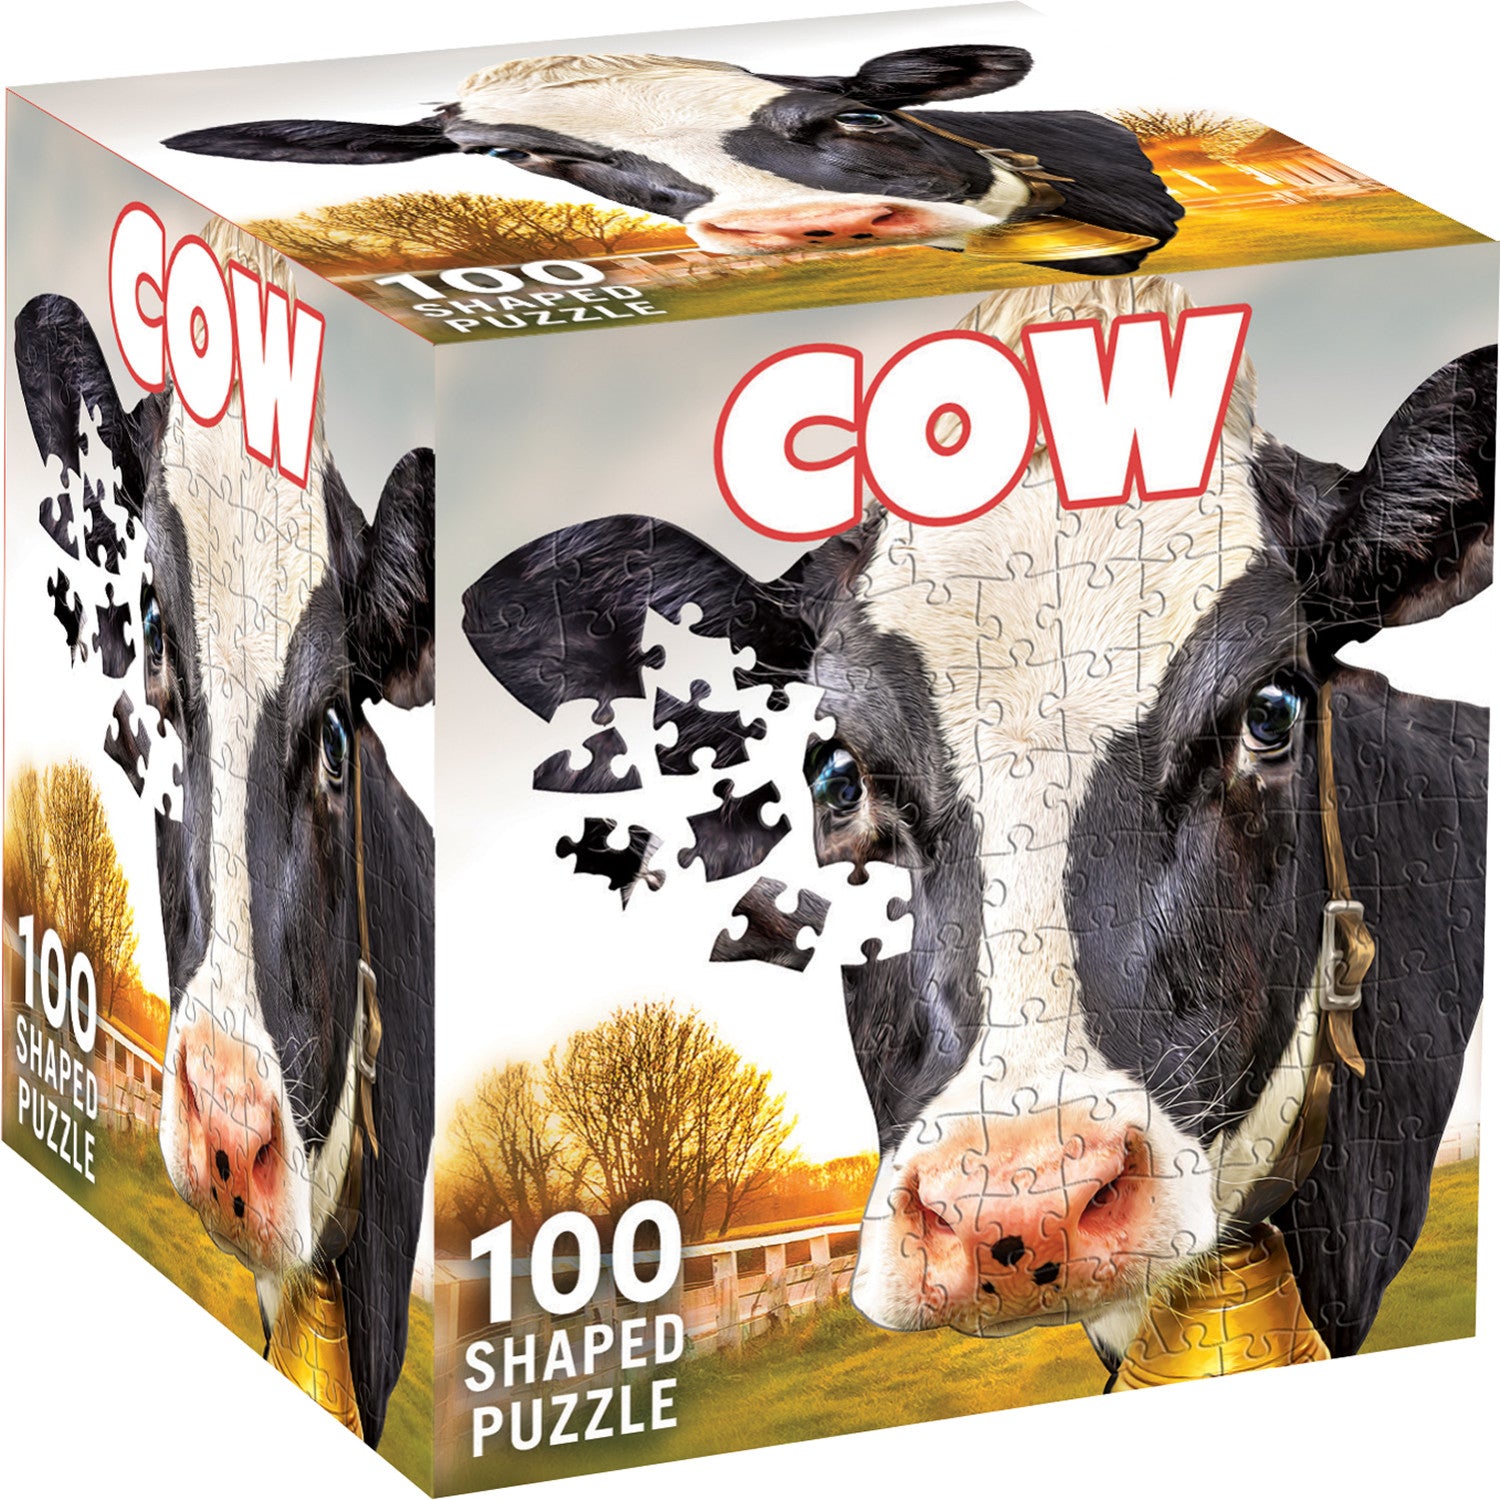 Cow 100 Piece Shaped Jigsaw Puzzle